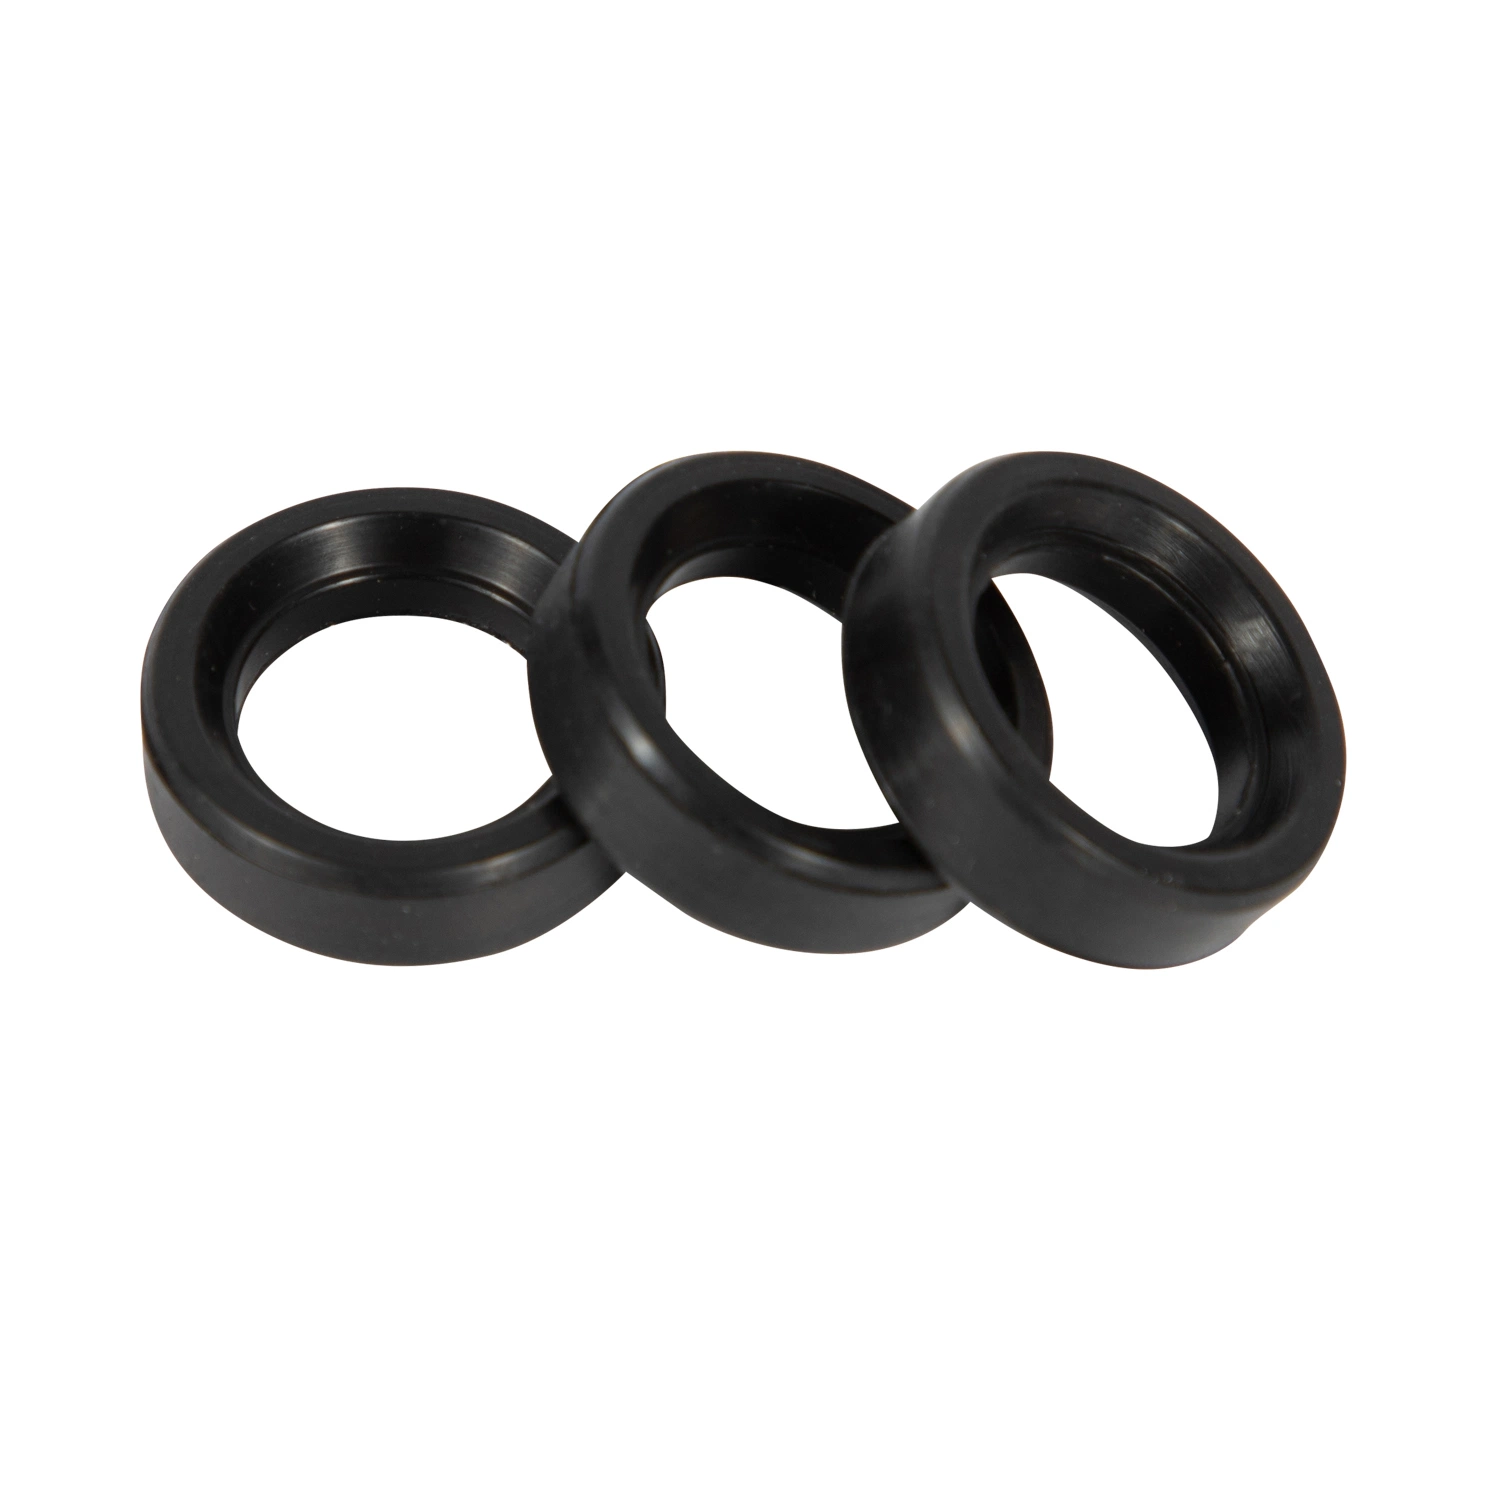 ISO/SGS Certified High Pressure Rubber Auto Oil Seals Mechanical Pump Seal